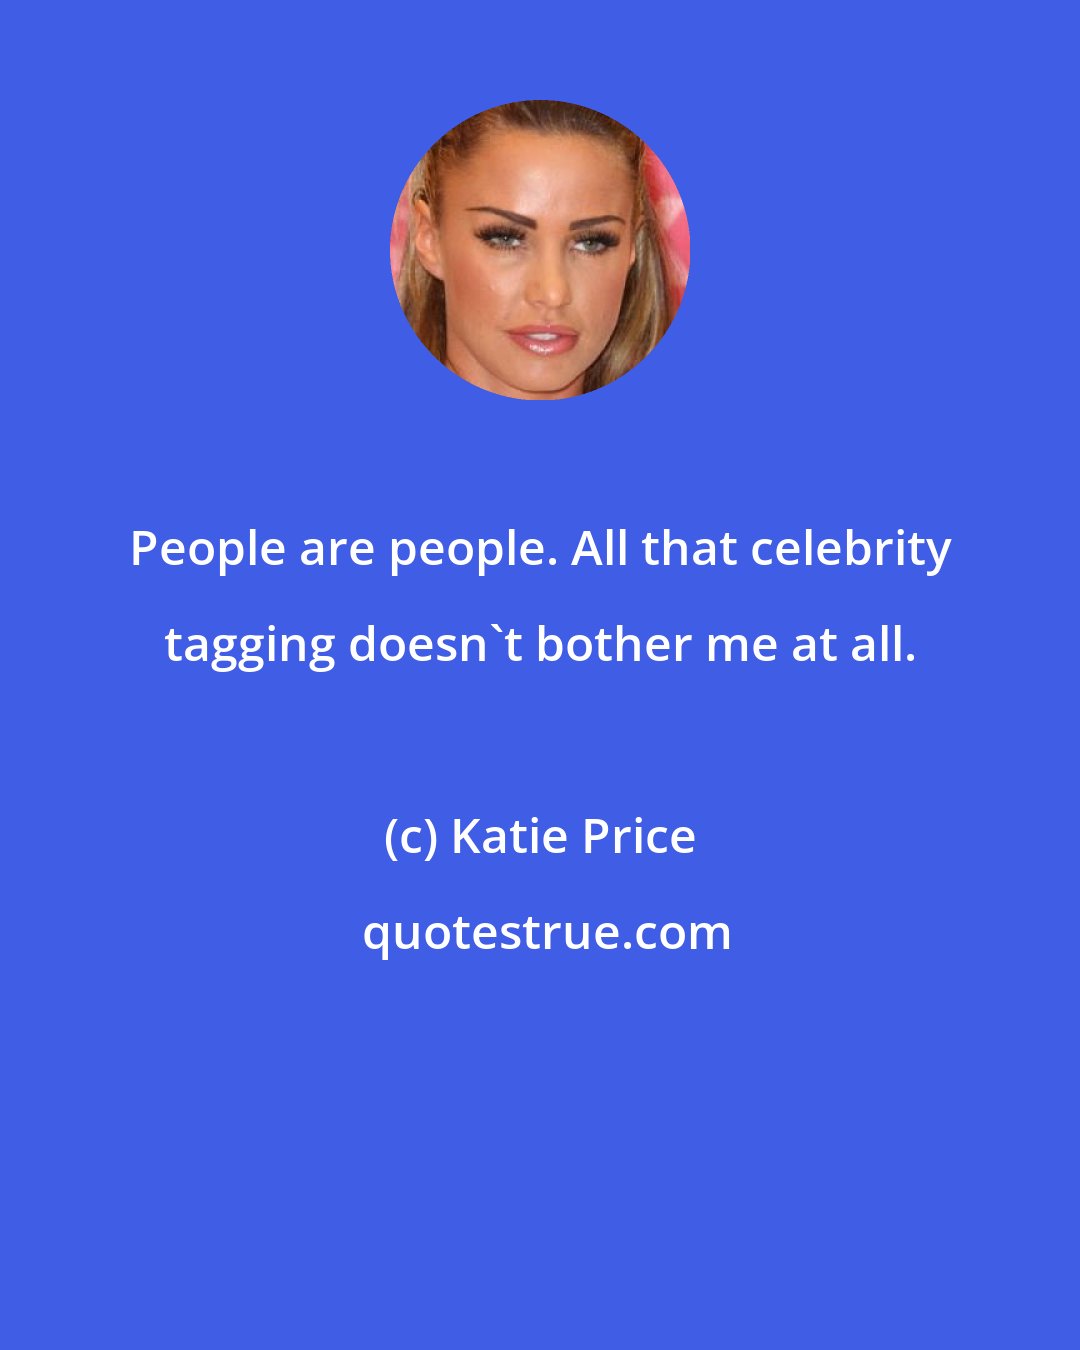 Katie Price: People are people. All that celebrity tagging doesn't bother me at all.